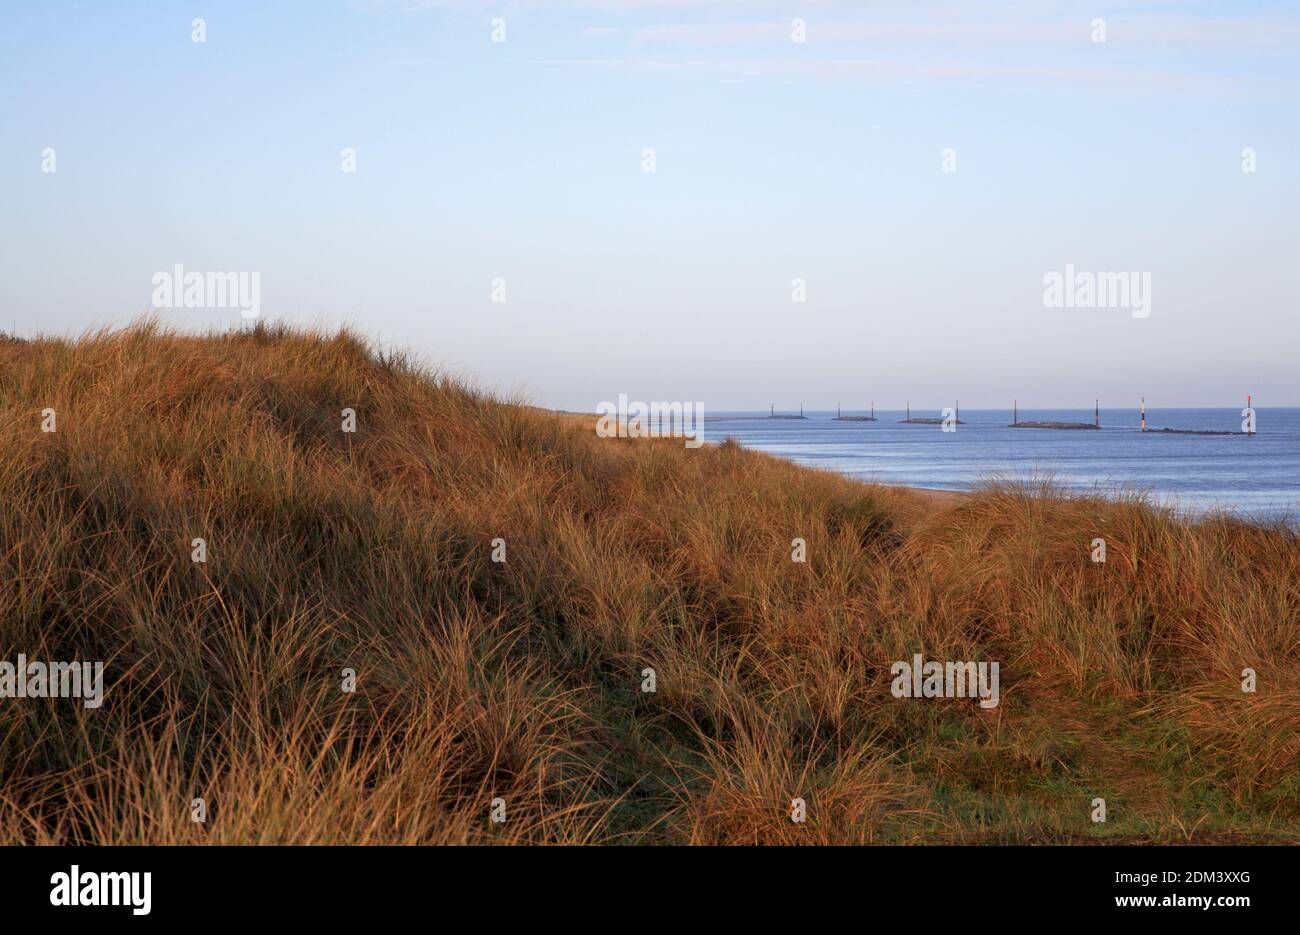 A view of sand dunes with marram grass, Ammophilia arenaria, overlooking the beach and sea at Waxham, Norfolk, England, United Kingdom. Stock Photo